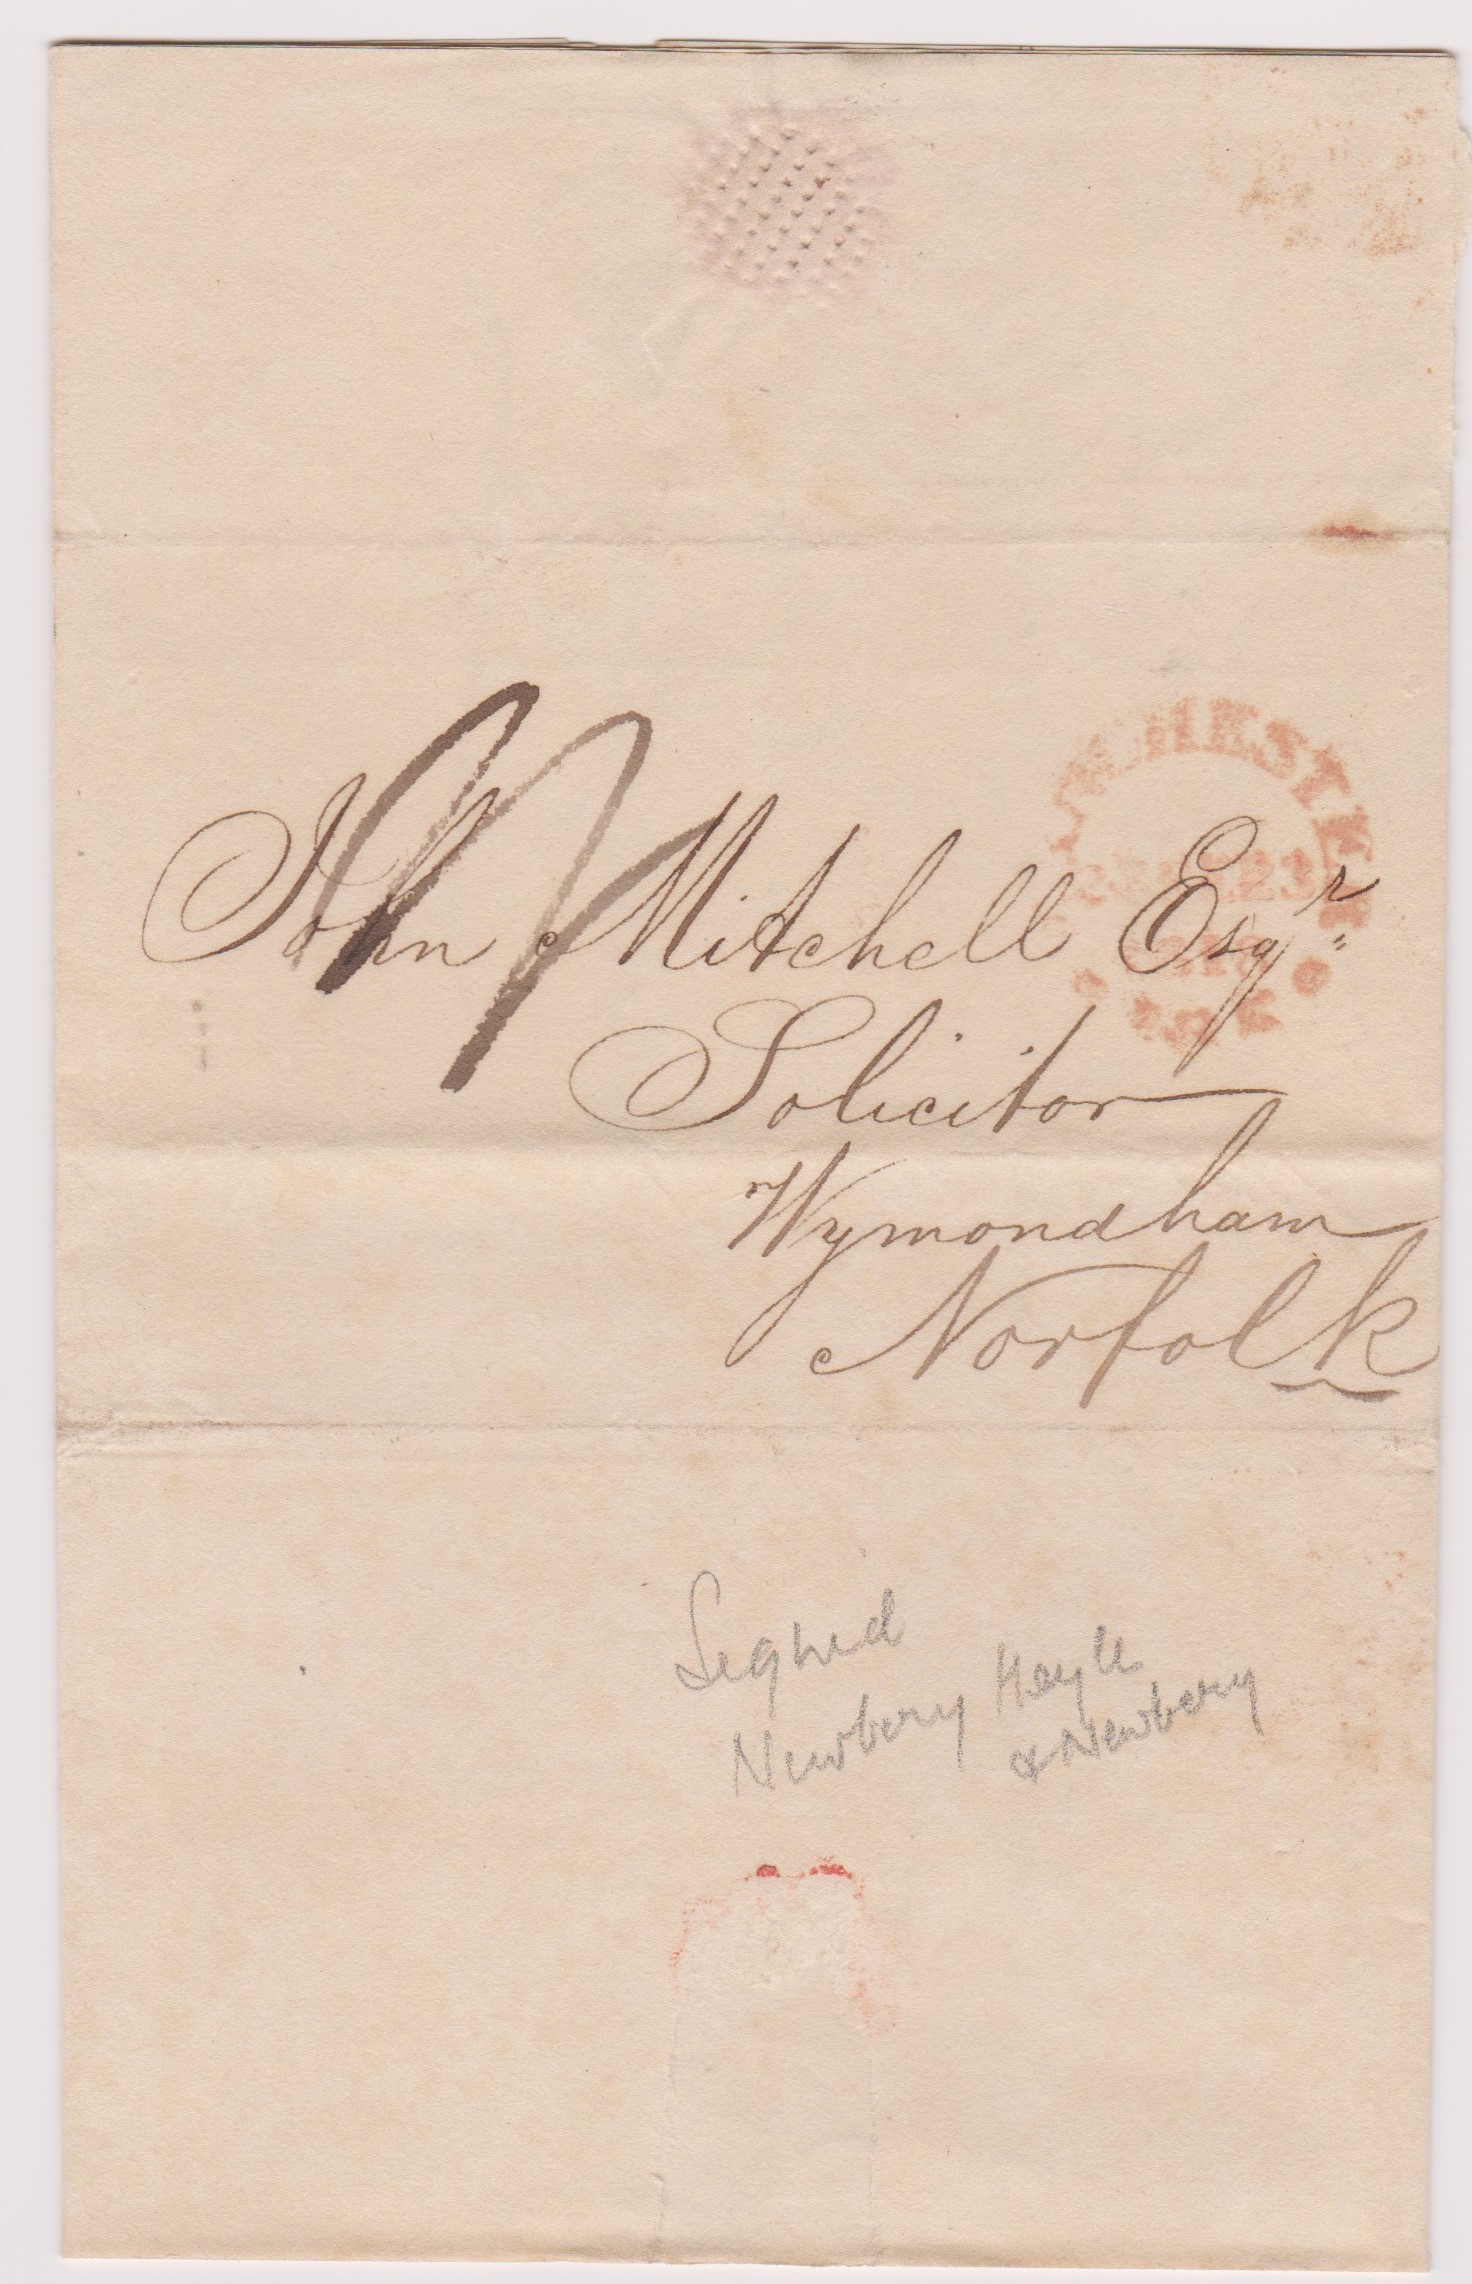 Great Britain 1818 - Postal History EL dated 23rd Feb 1818 Manchester posted to Wymondham-red